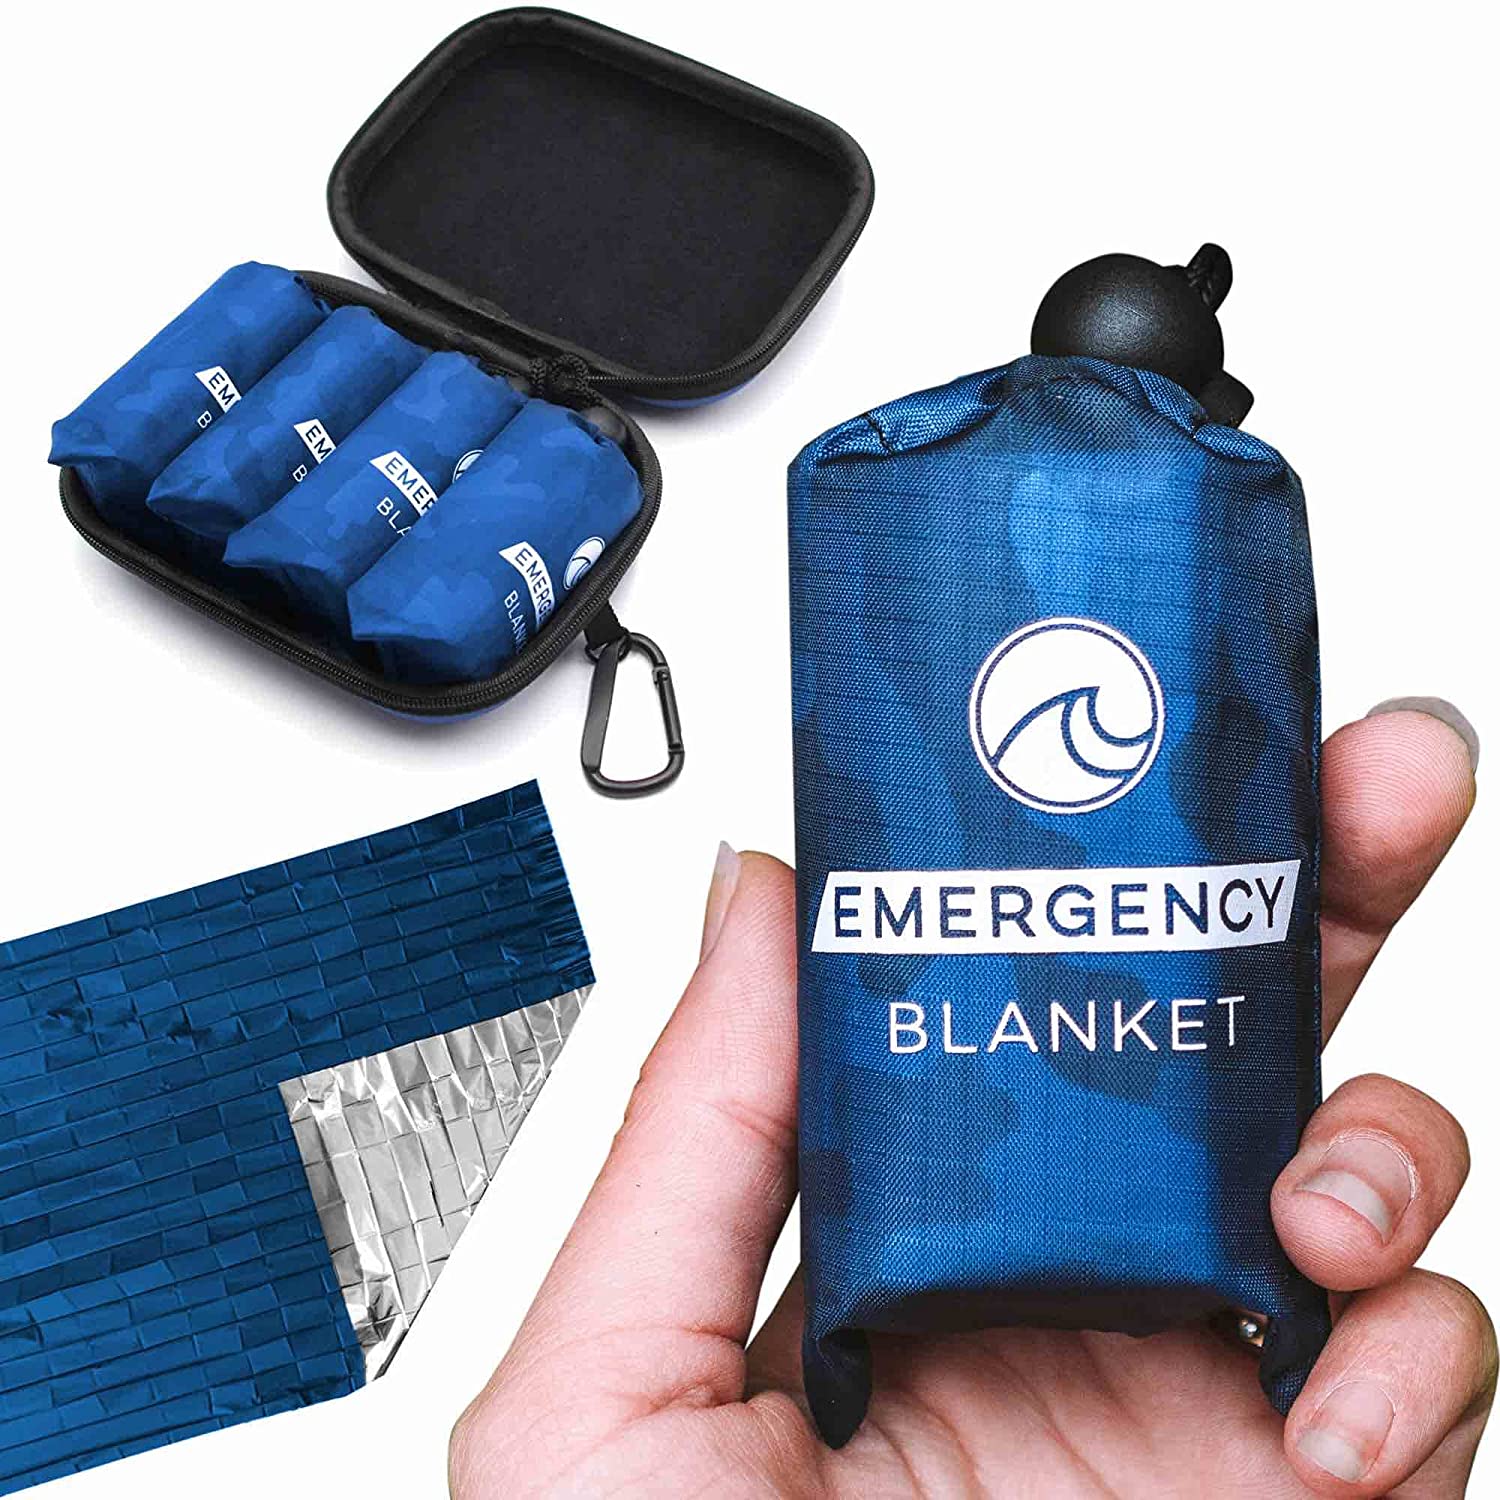 A 4 pack of mylar emergency blankets. The 4 pack are in an EVA case. There is also a hand holding one of the blankets in its pouch to show how small it is. 